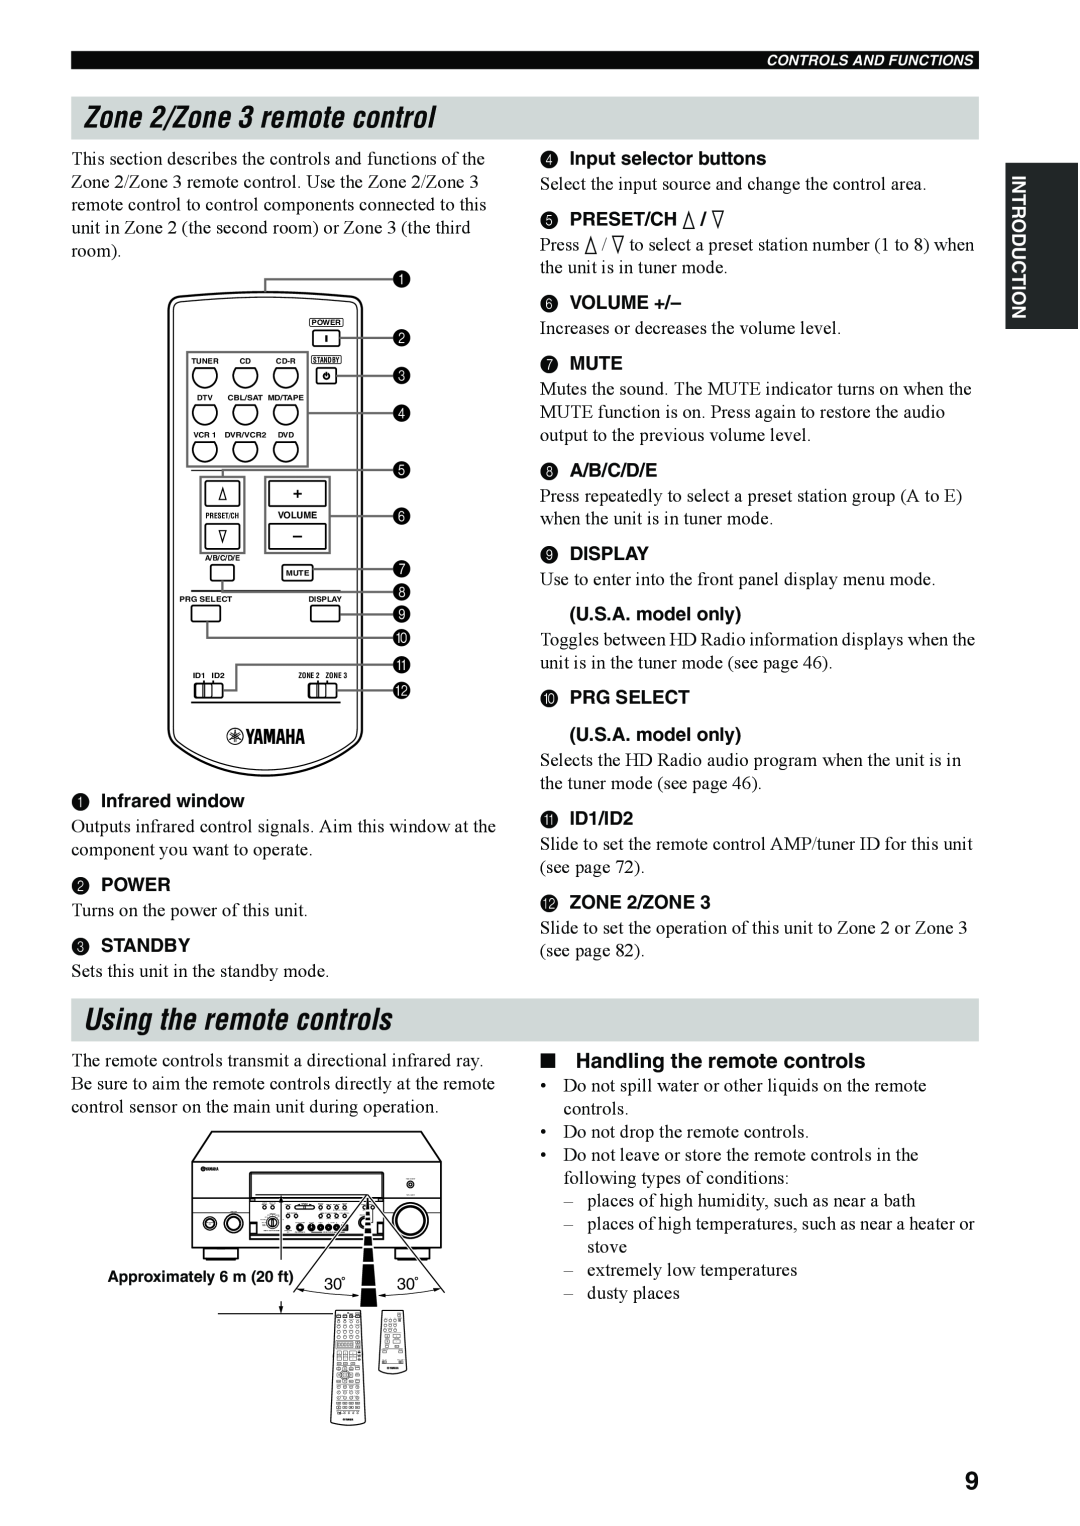 Yamaha RX-V4600 Zone 2/Zone 3 remote control, Using the remote controls, Handling the remote controls, Power, Standby 